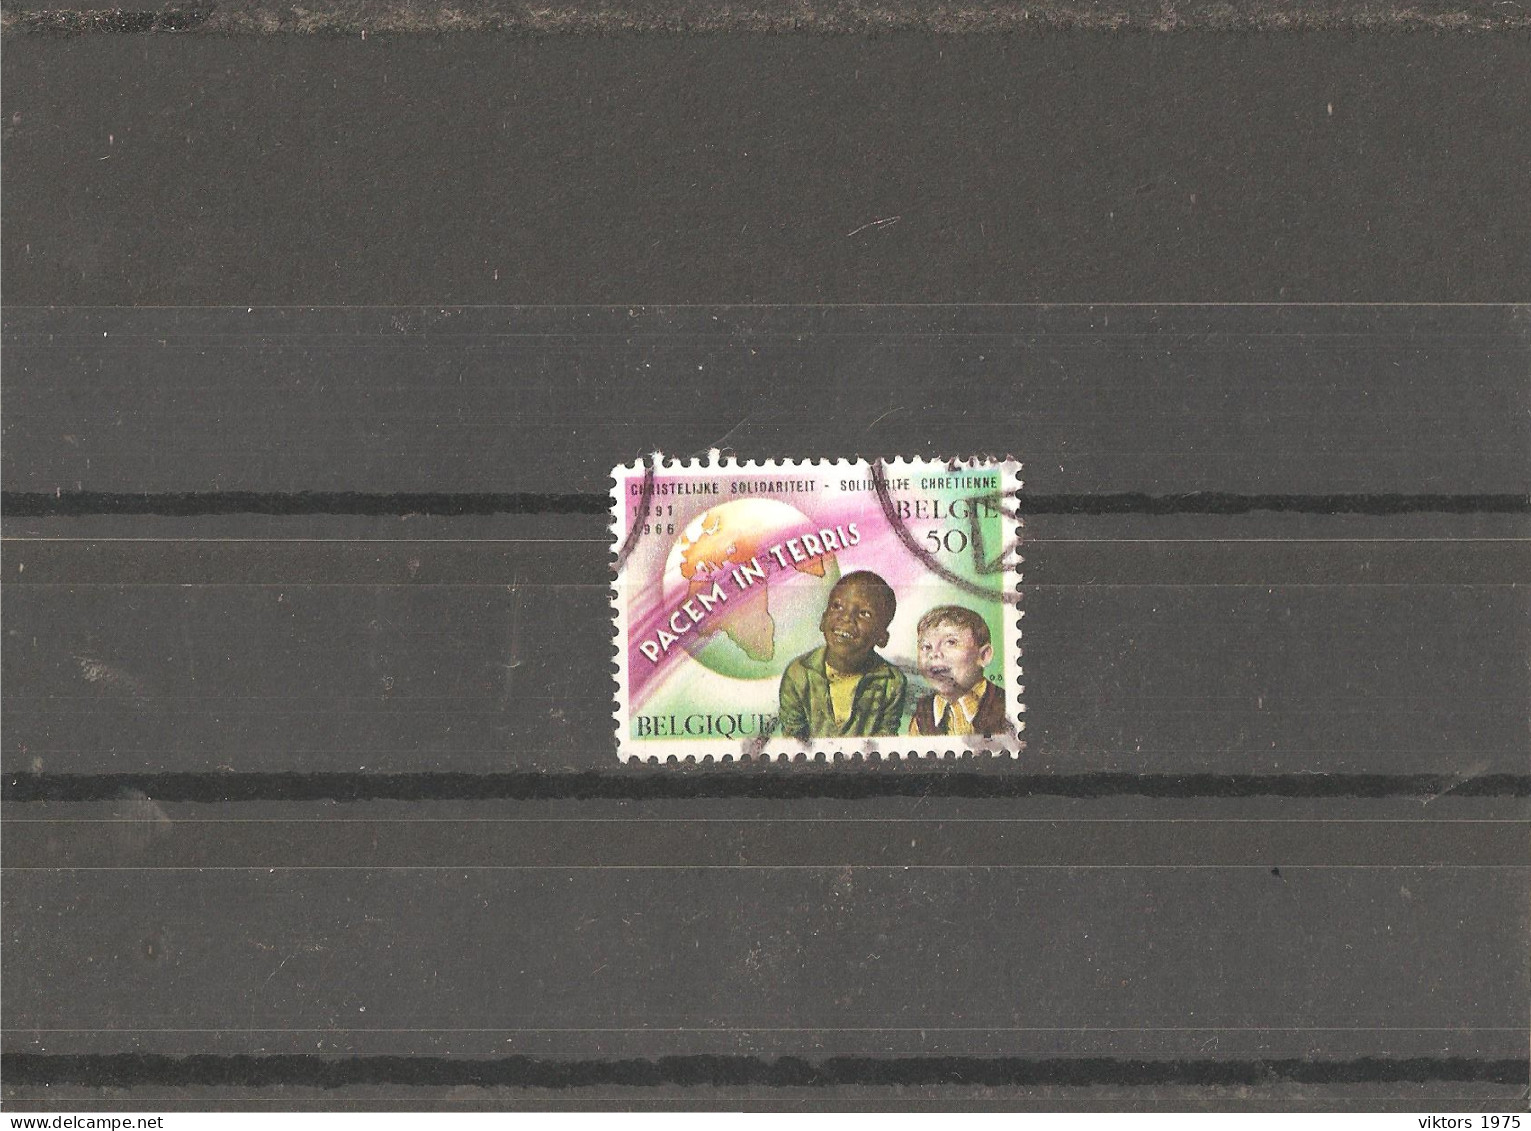 Used Stamp Nr.1417 In MICHEL Catalog - Used Stamps